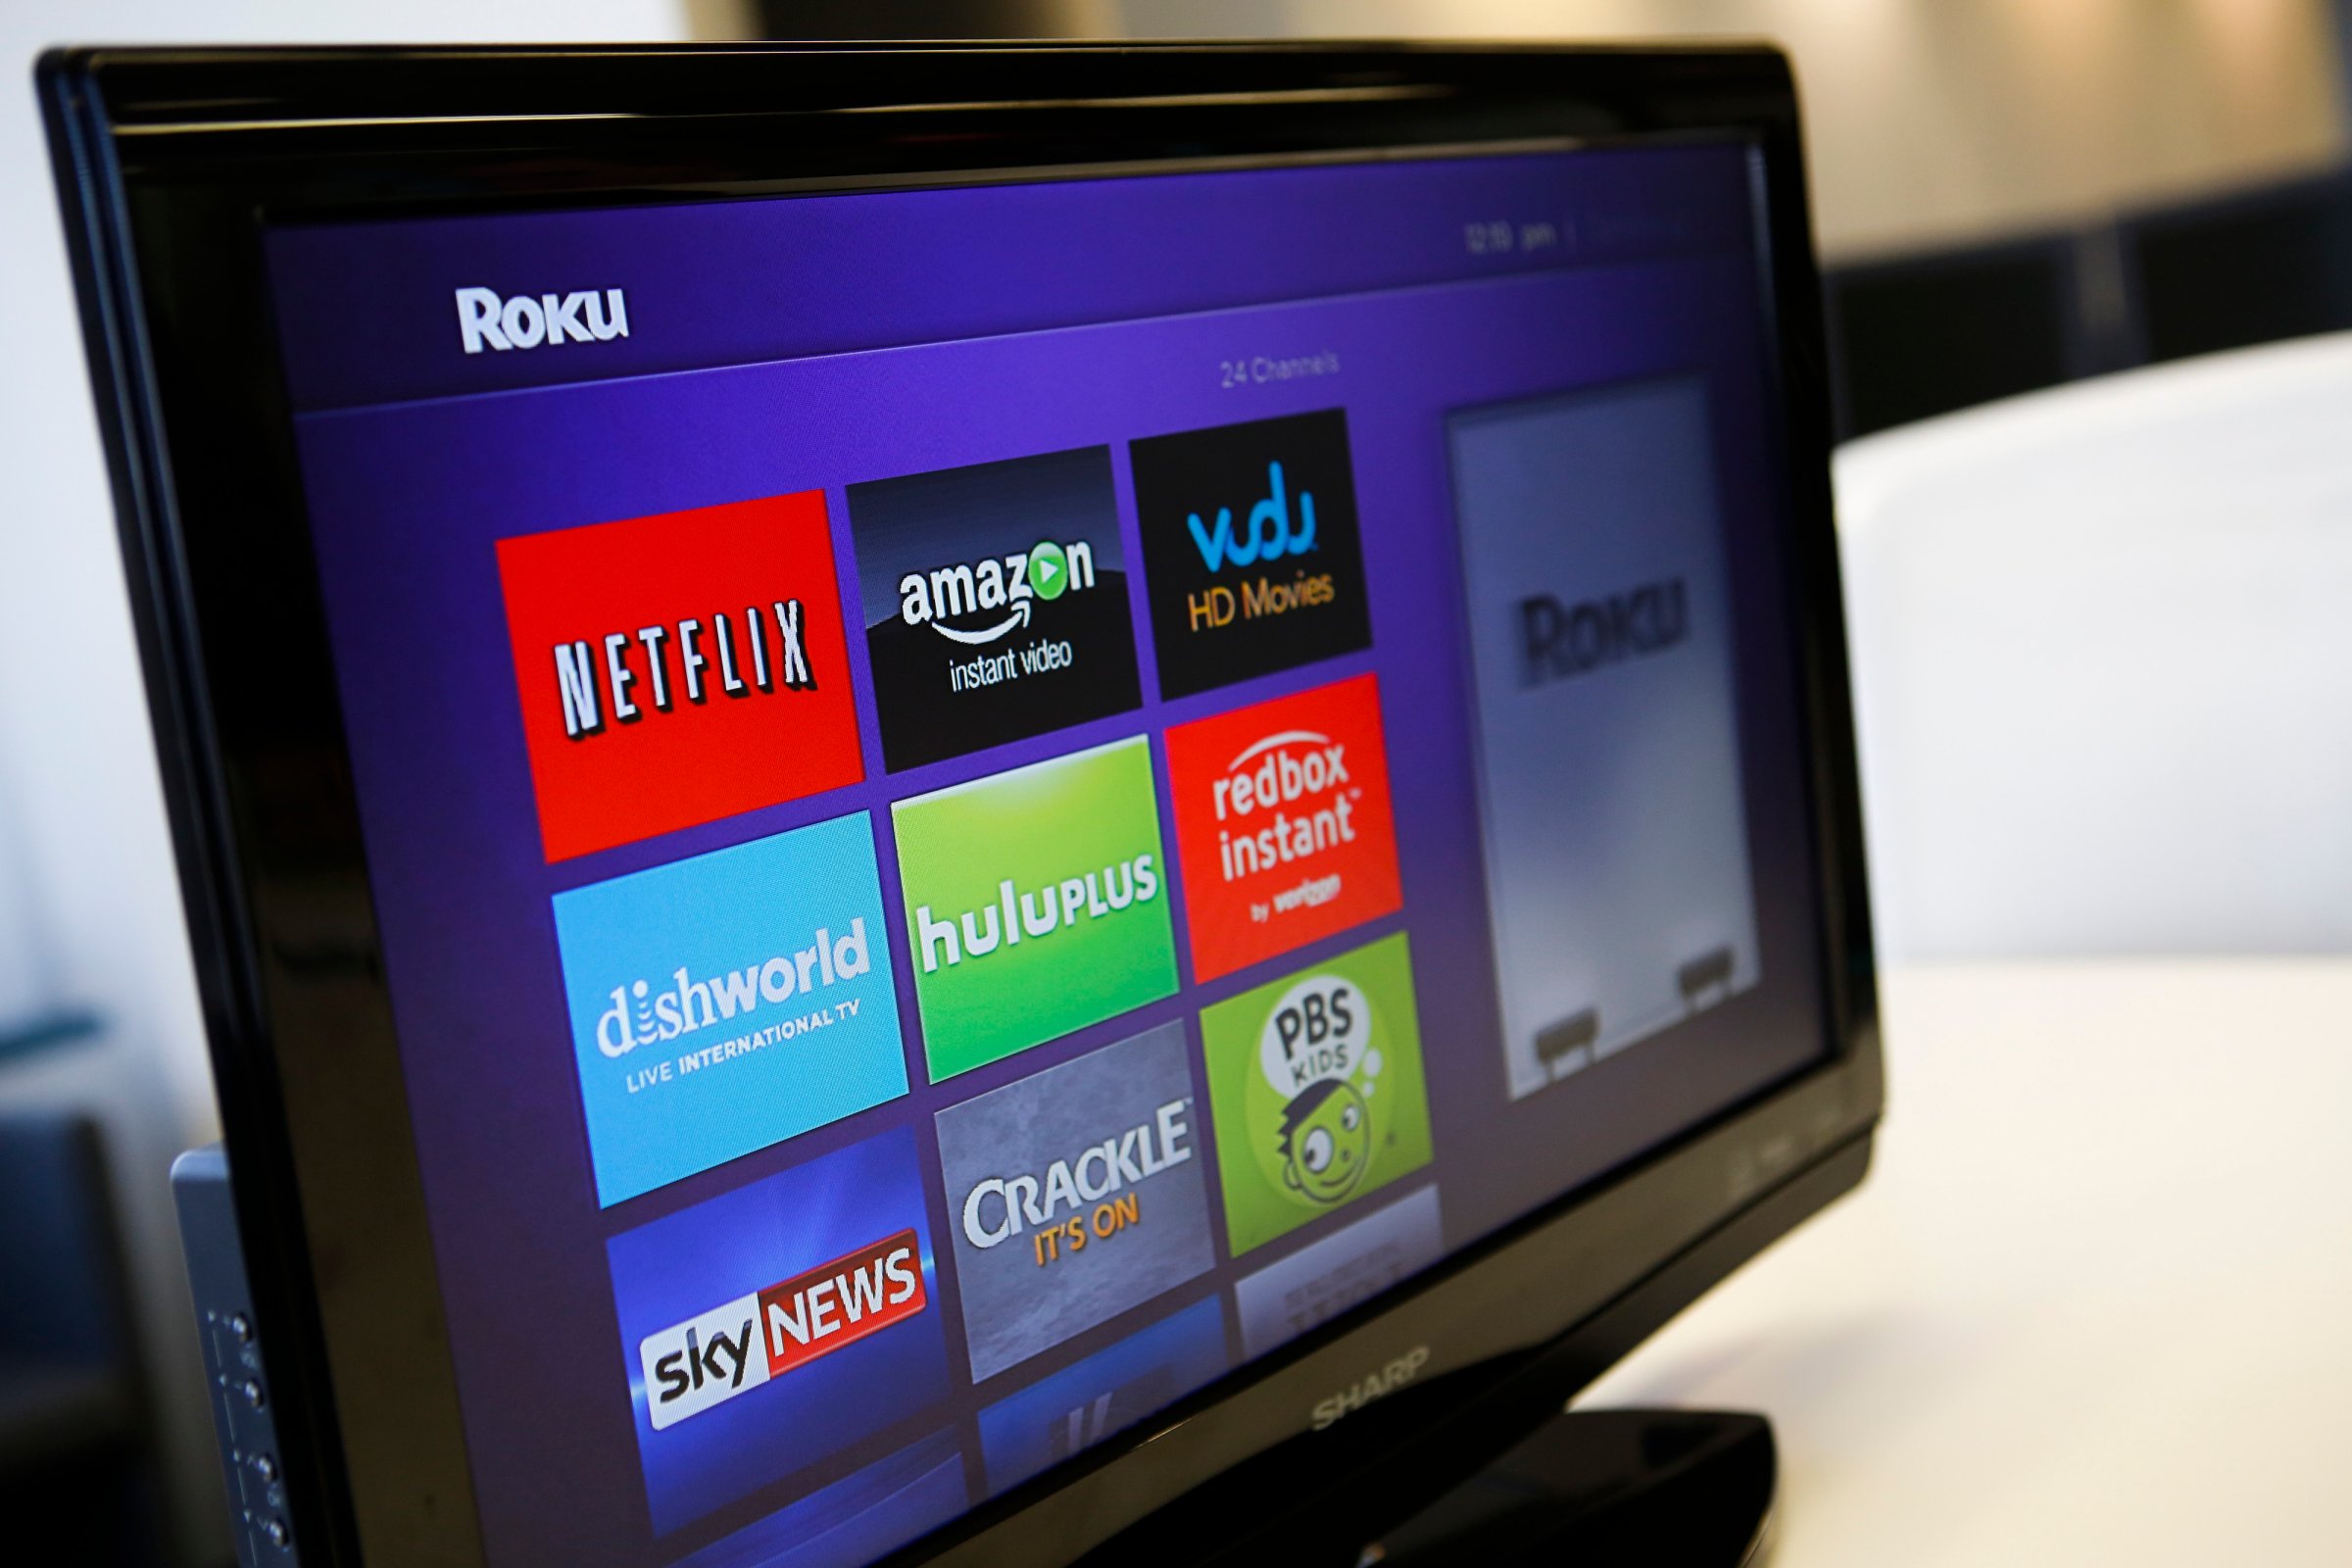 The Roku 3 television streaming player menu screen featuring Netflix, Amazon, Vudu, Hulu, and Redbox Instant is shown on a television in Los Angeles on Sept. 12, 2013.